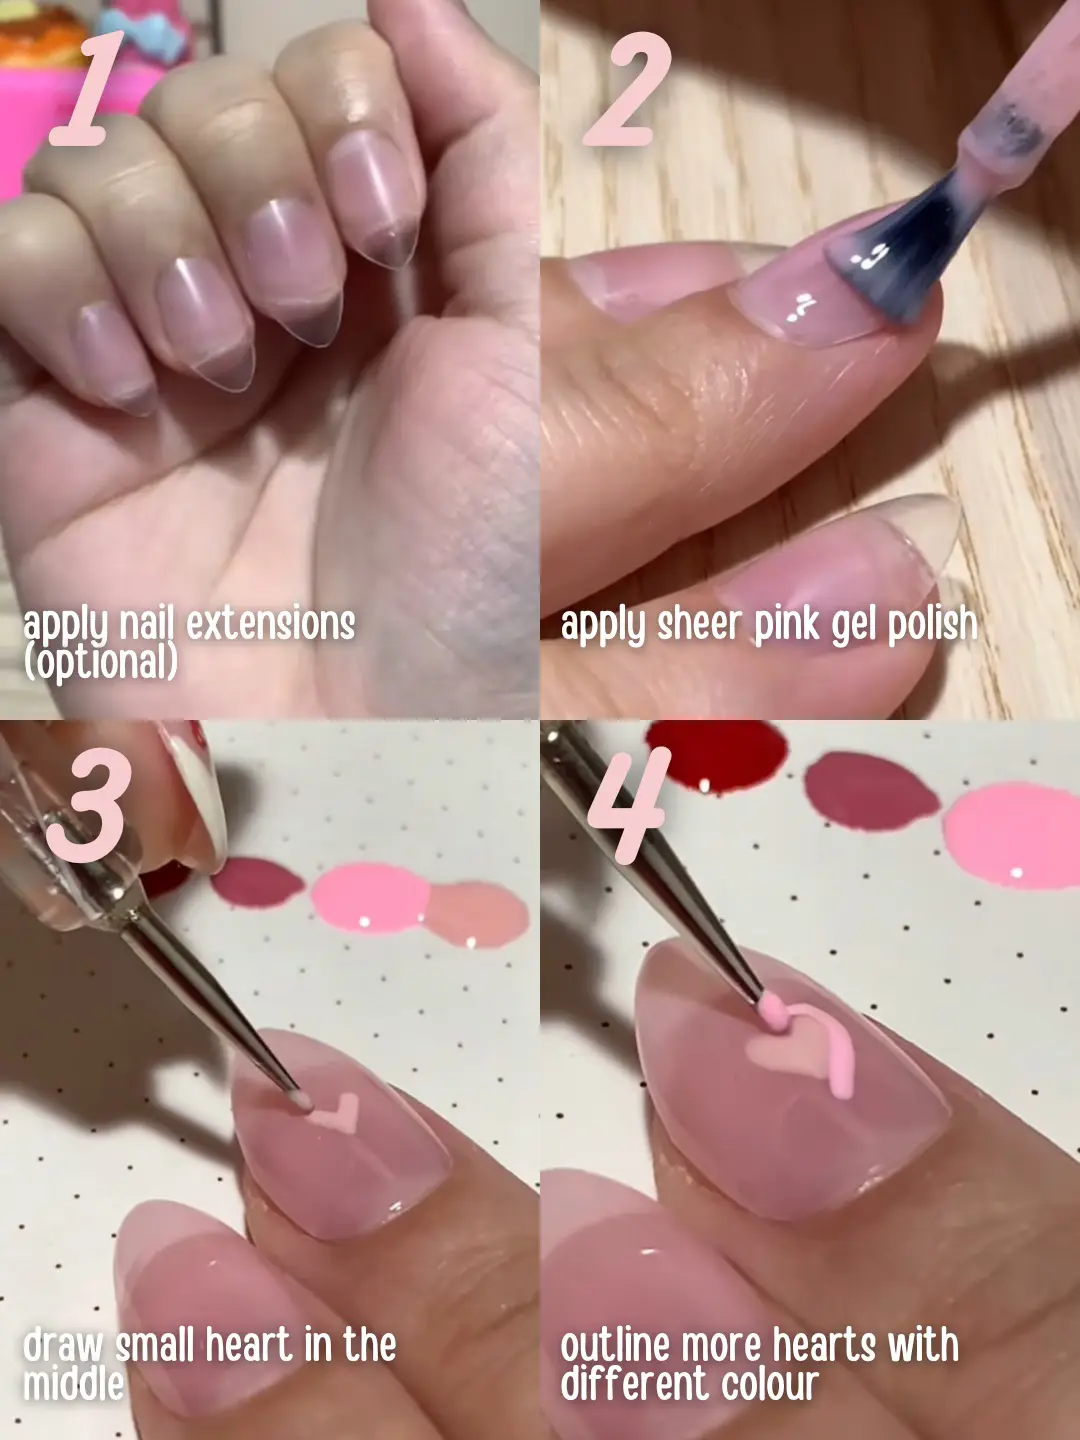 how to make sheer base gel polish 💅🏻, Gallery posted by farah